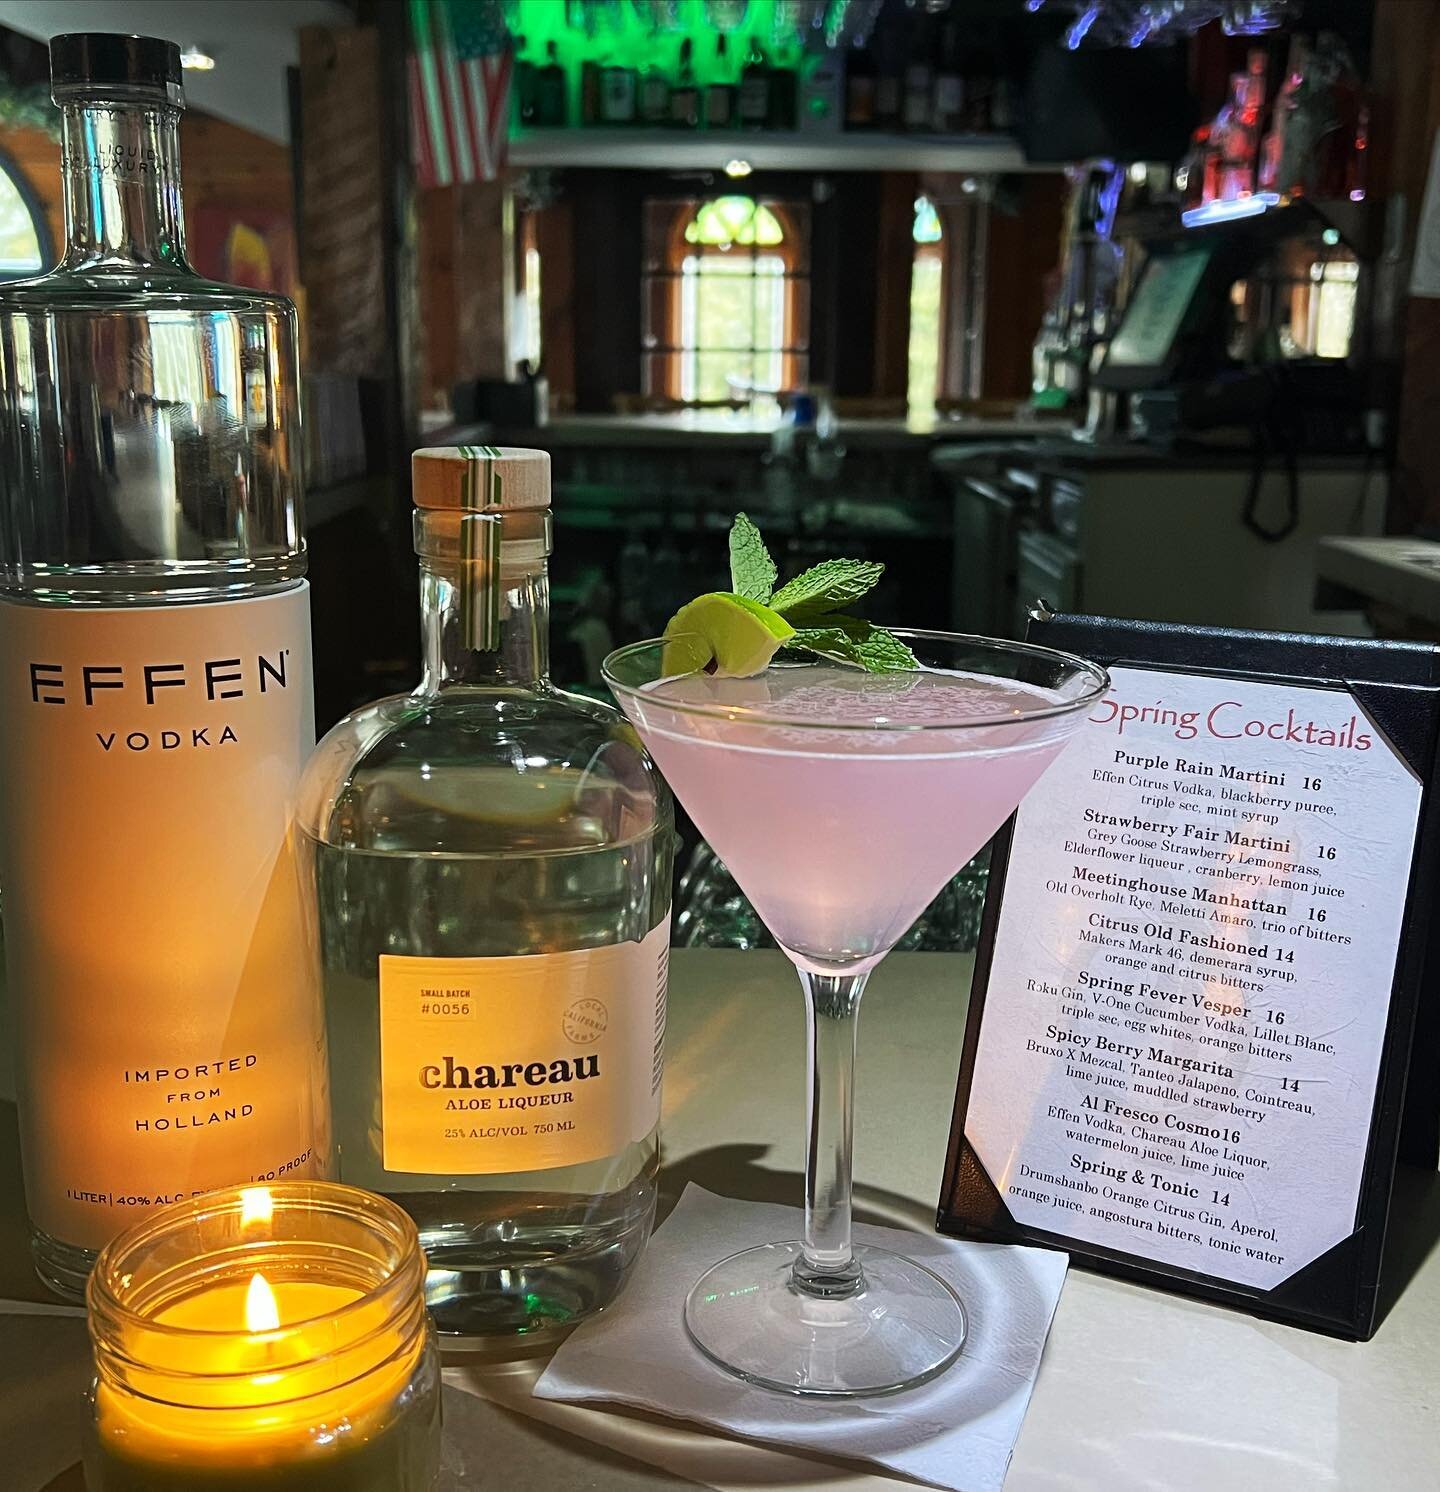 The Month of Love is behind us and now we look forward to Spring! Tonight we roll out our Spring Cocktail Menu with drinks highlighting bright and refreshing flavors. 

Who doesn&rsquo;t like a good Cosmo? Yes, we&rsquo;ve been told we make the best 